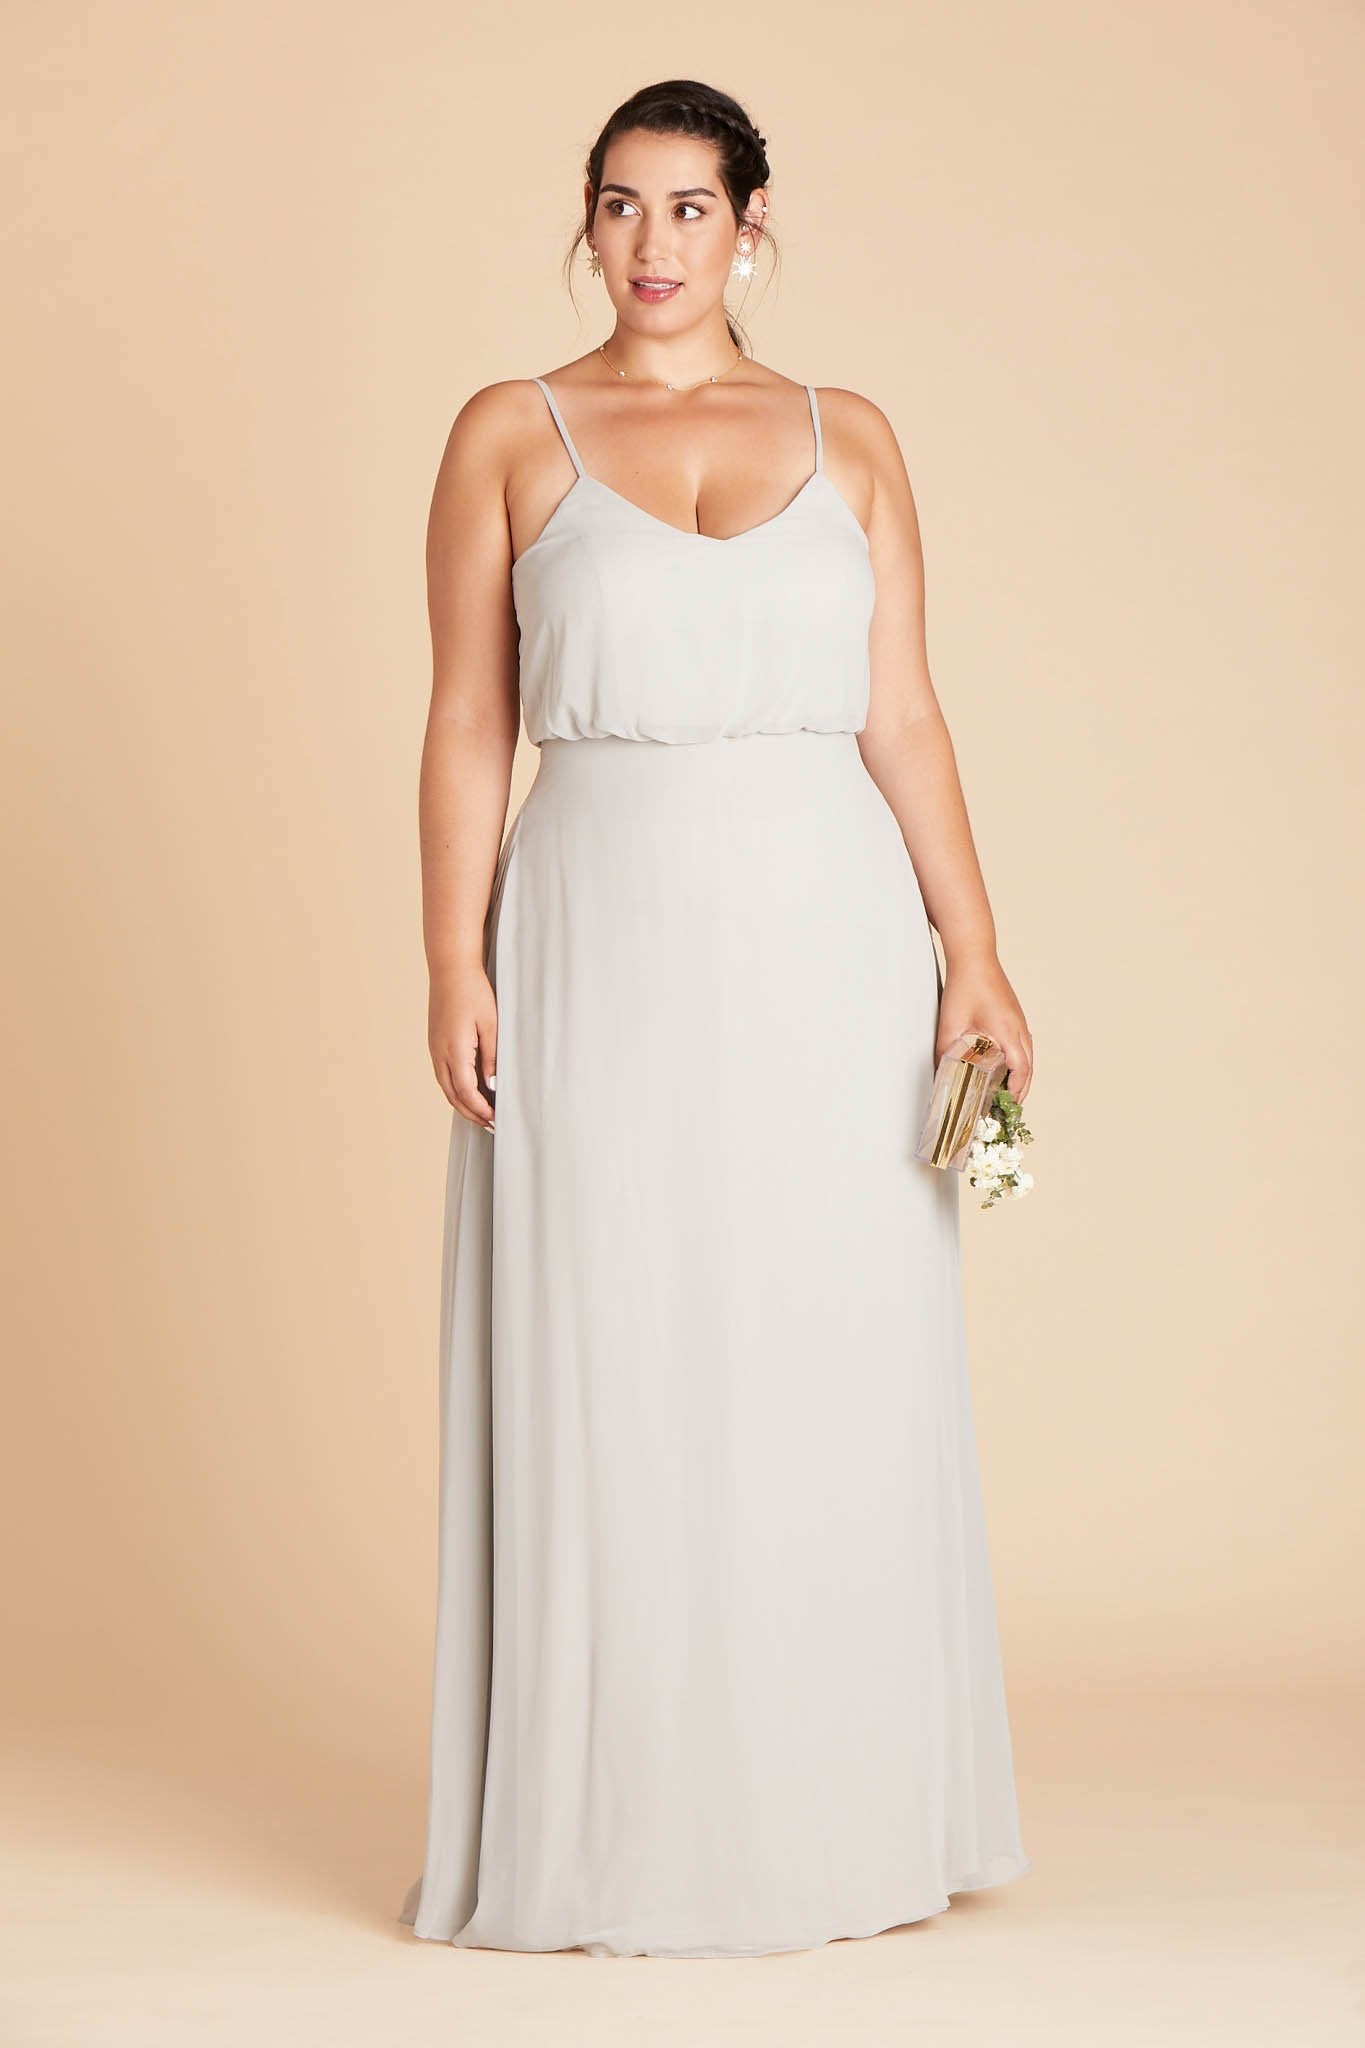 Gwennie plus size bridesmaid dress in dove gray chiffon by Birdy Grey, front view